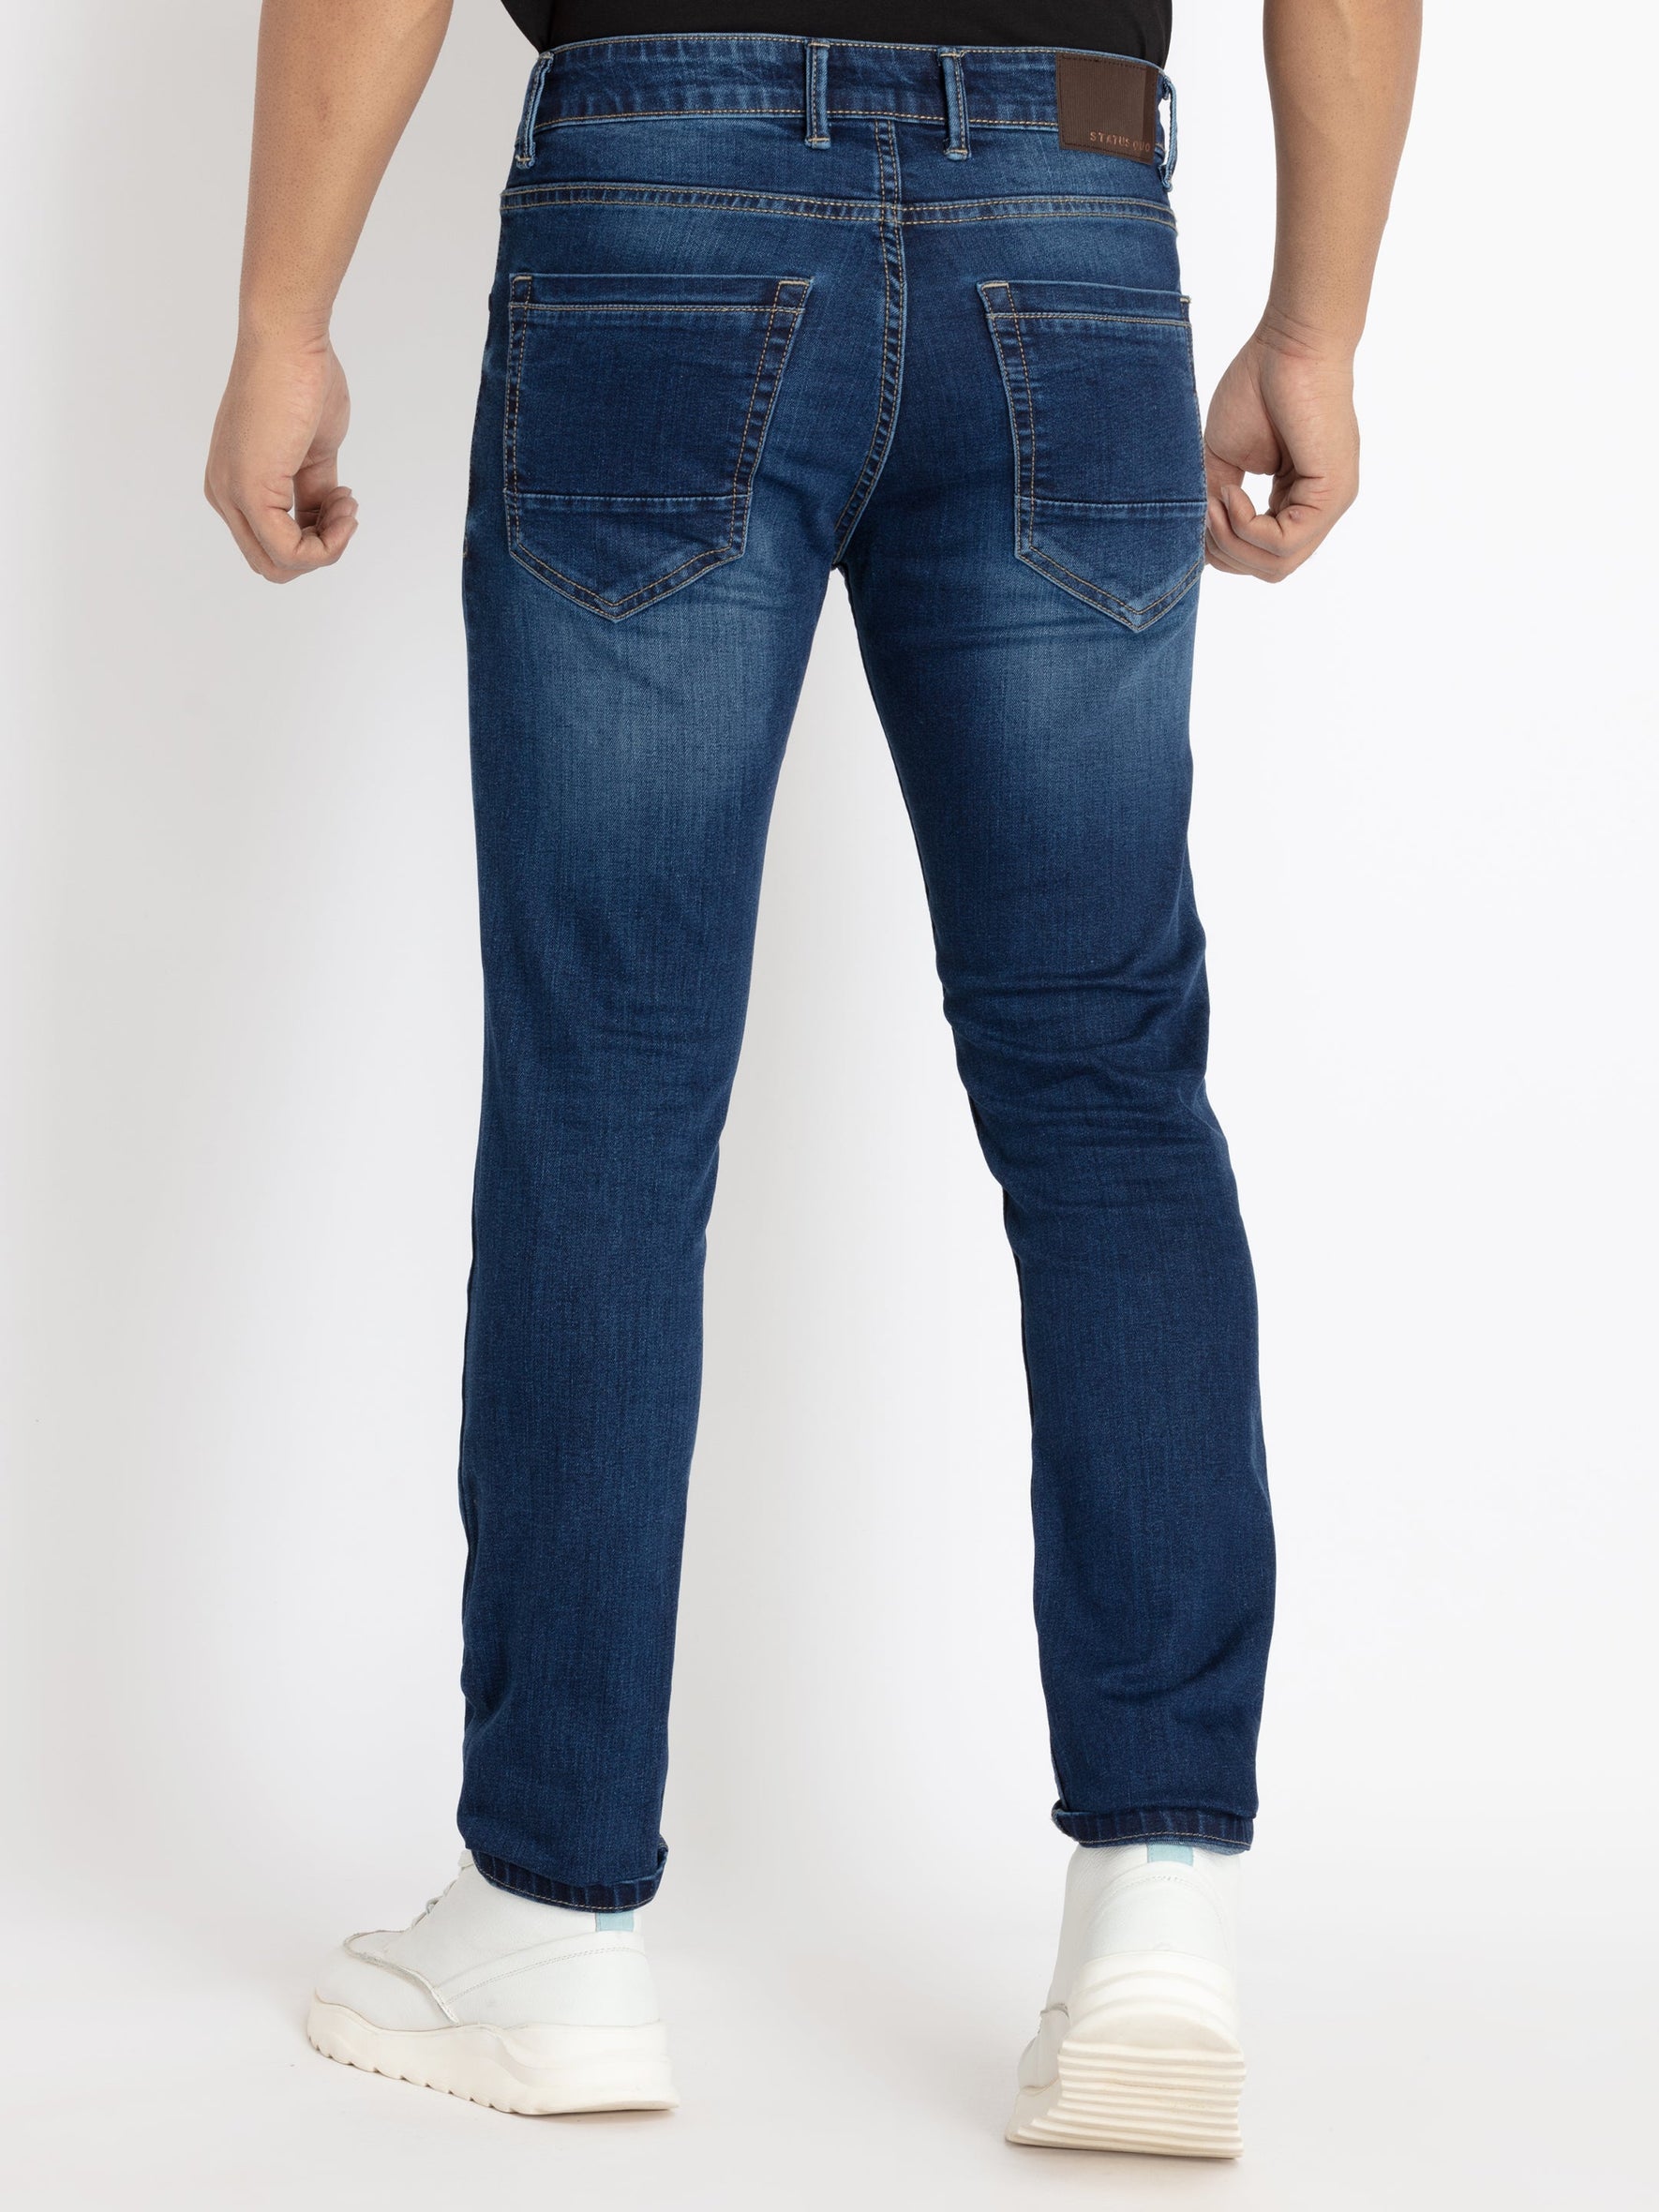 Buy Jeans Online - Stylish Jeans for Men | Status Quo